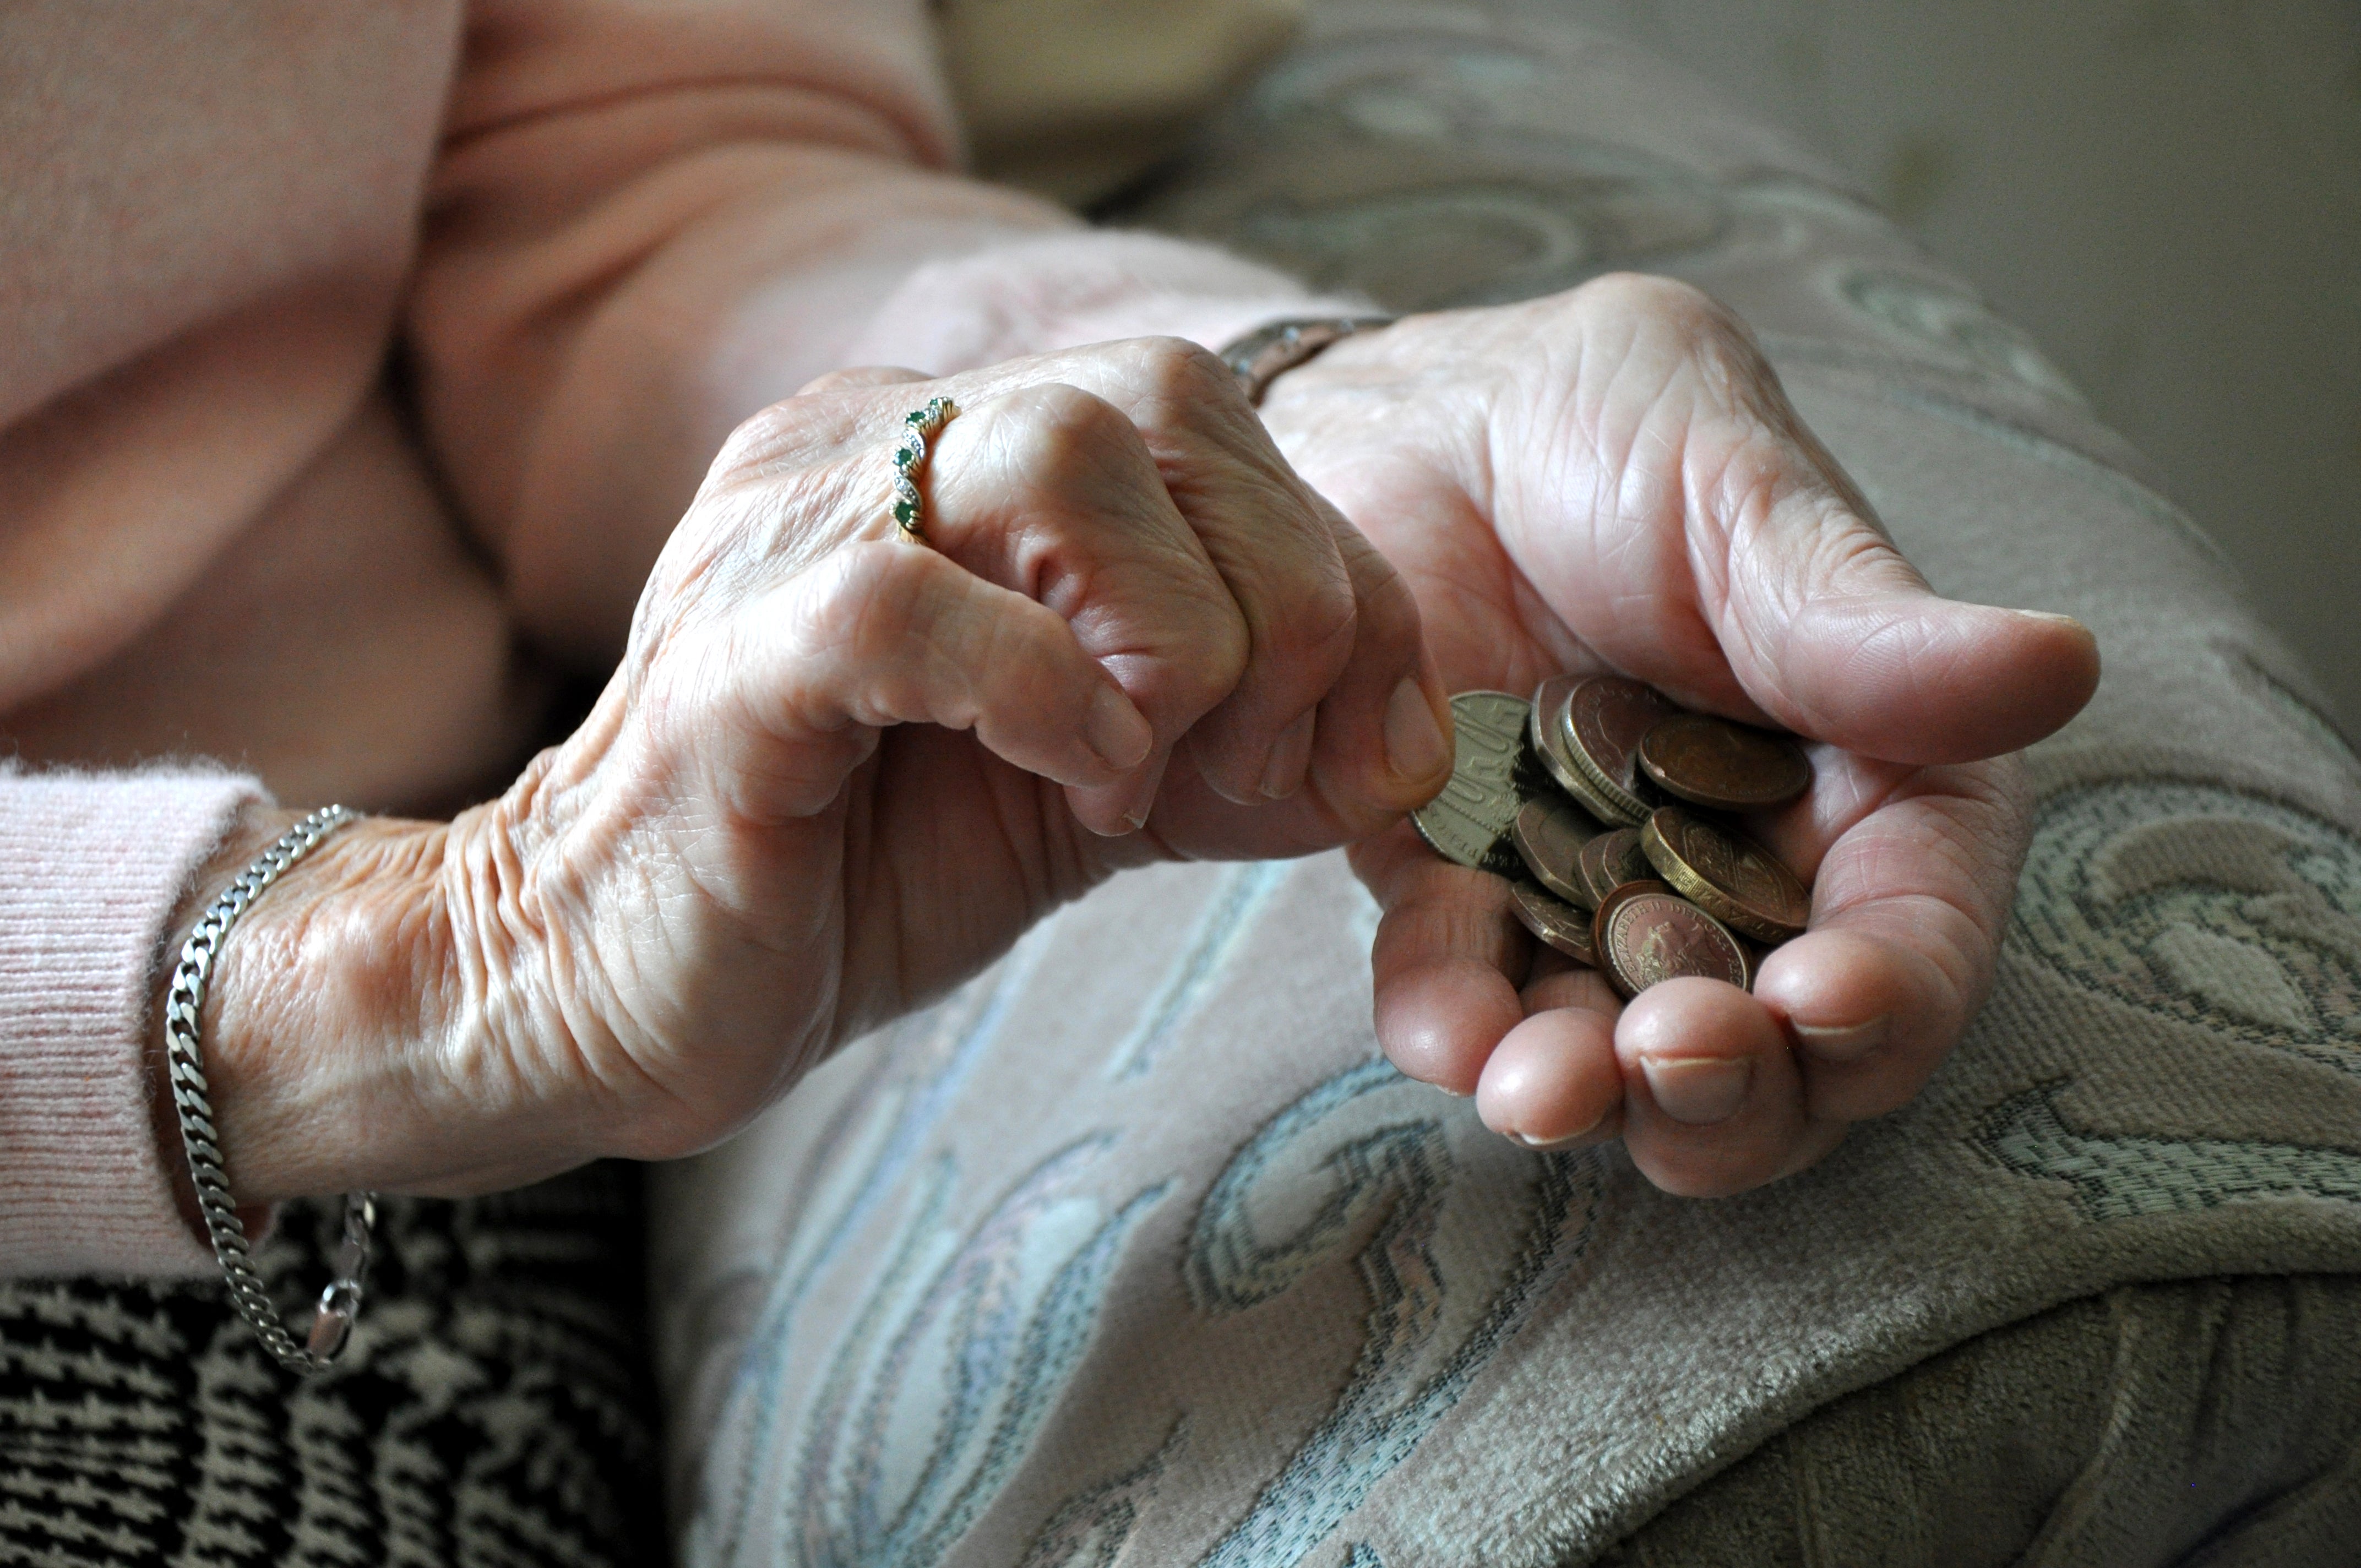 Around one in five women pensioners is living in poverty, according to Age UK